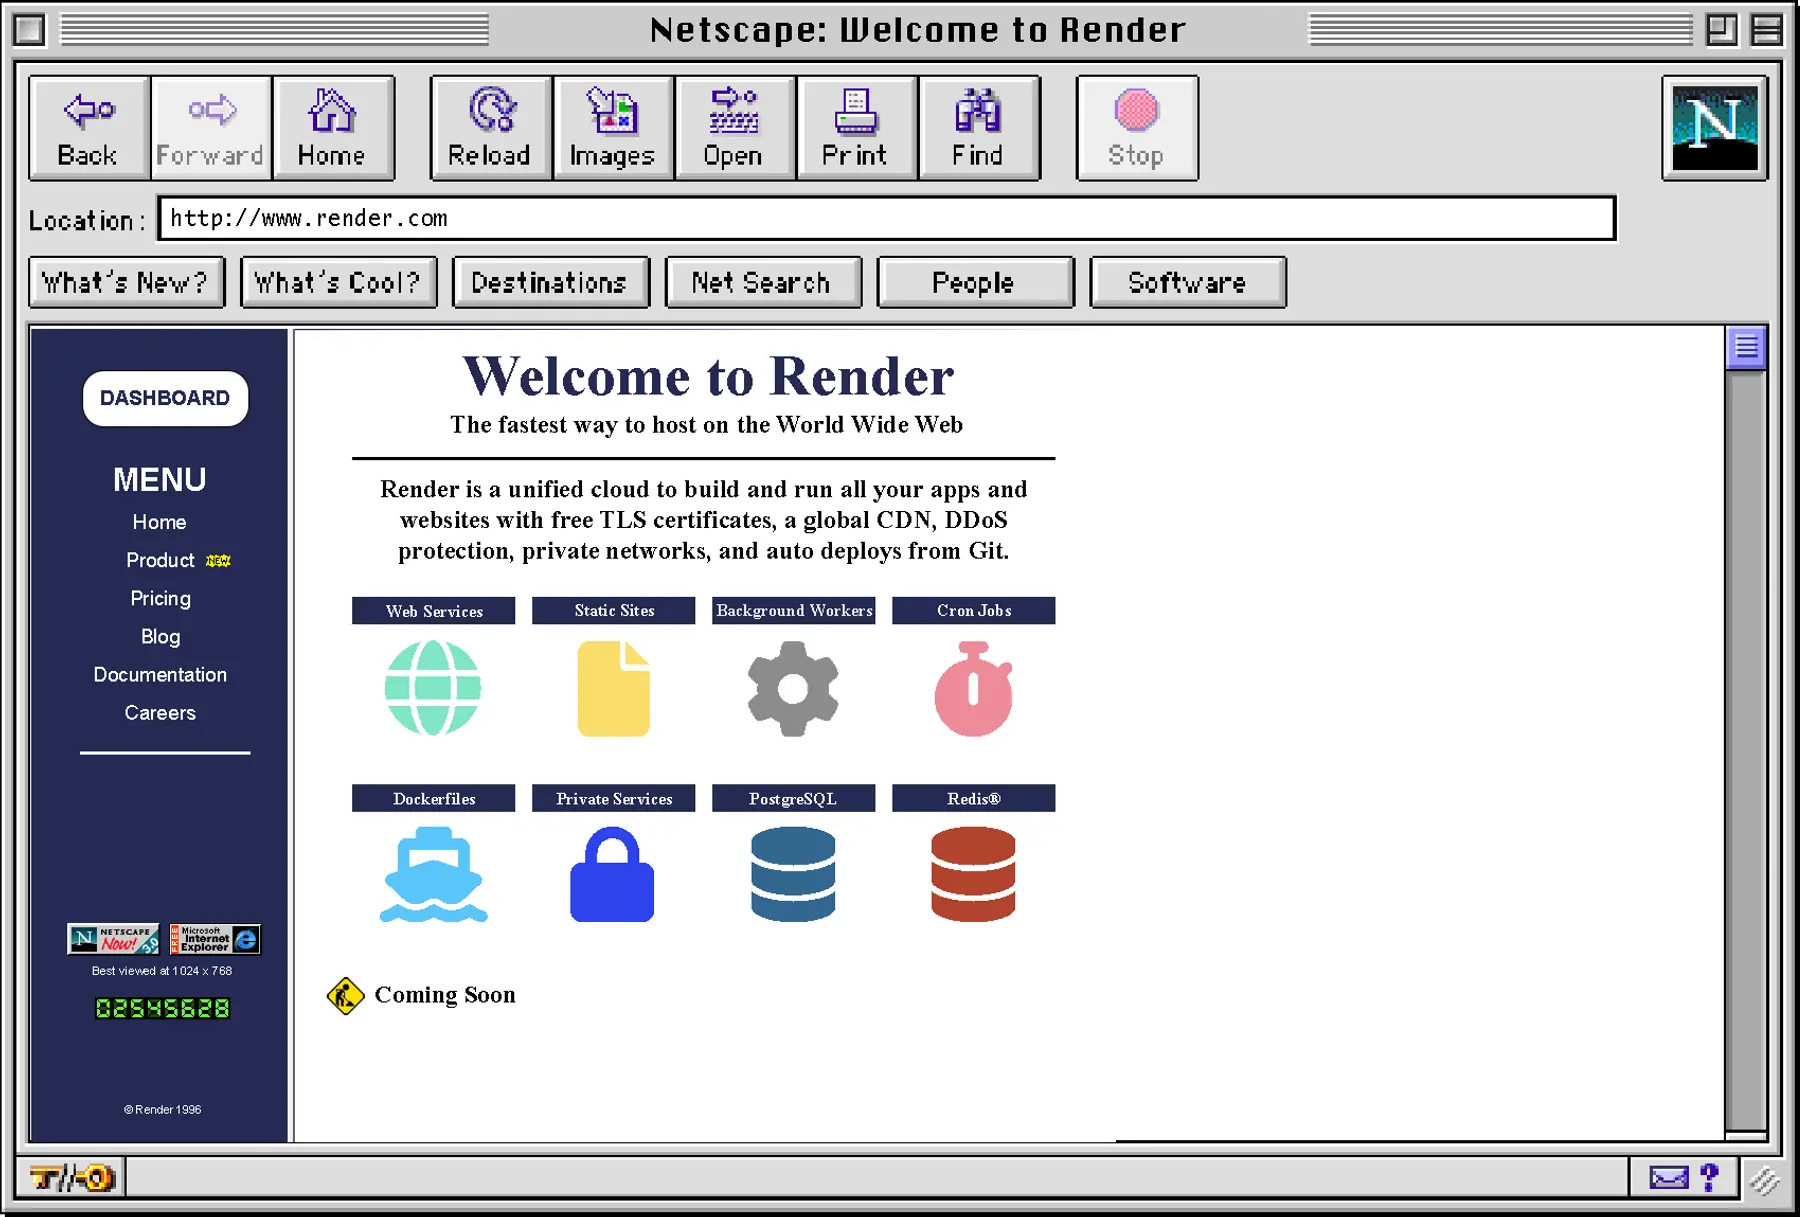 Our vision of a 1990s style Render website. It was a simpler time.